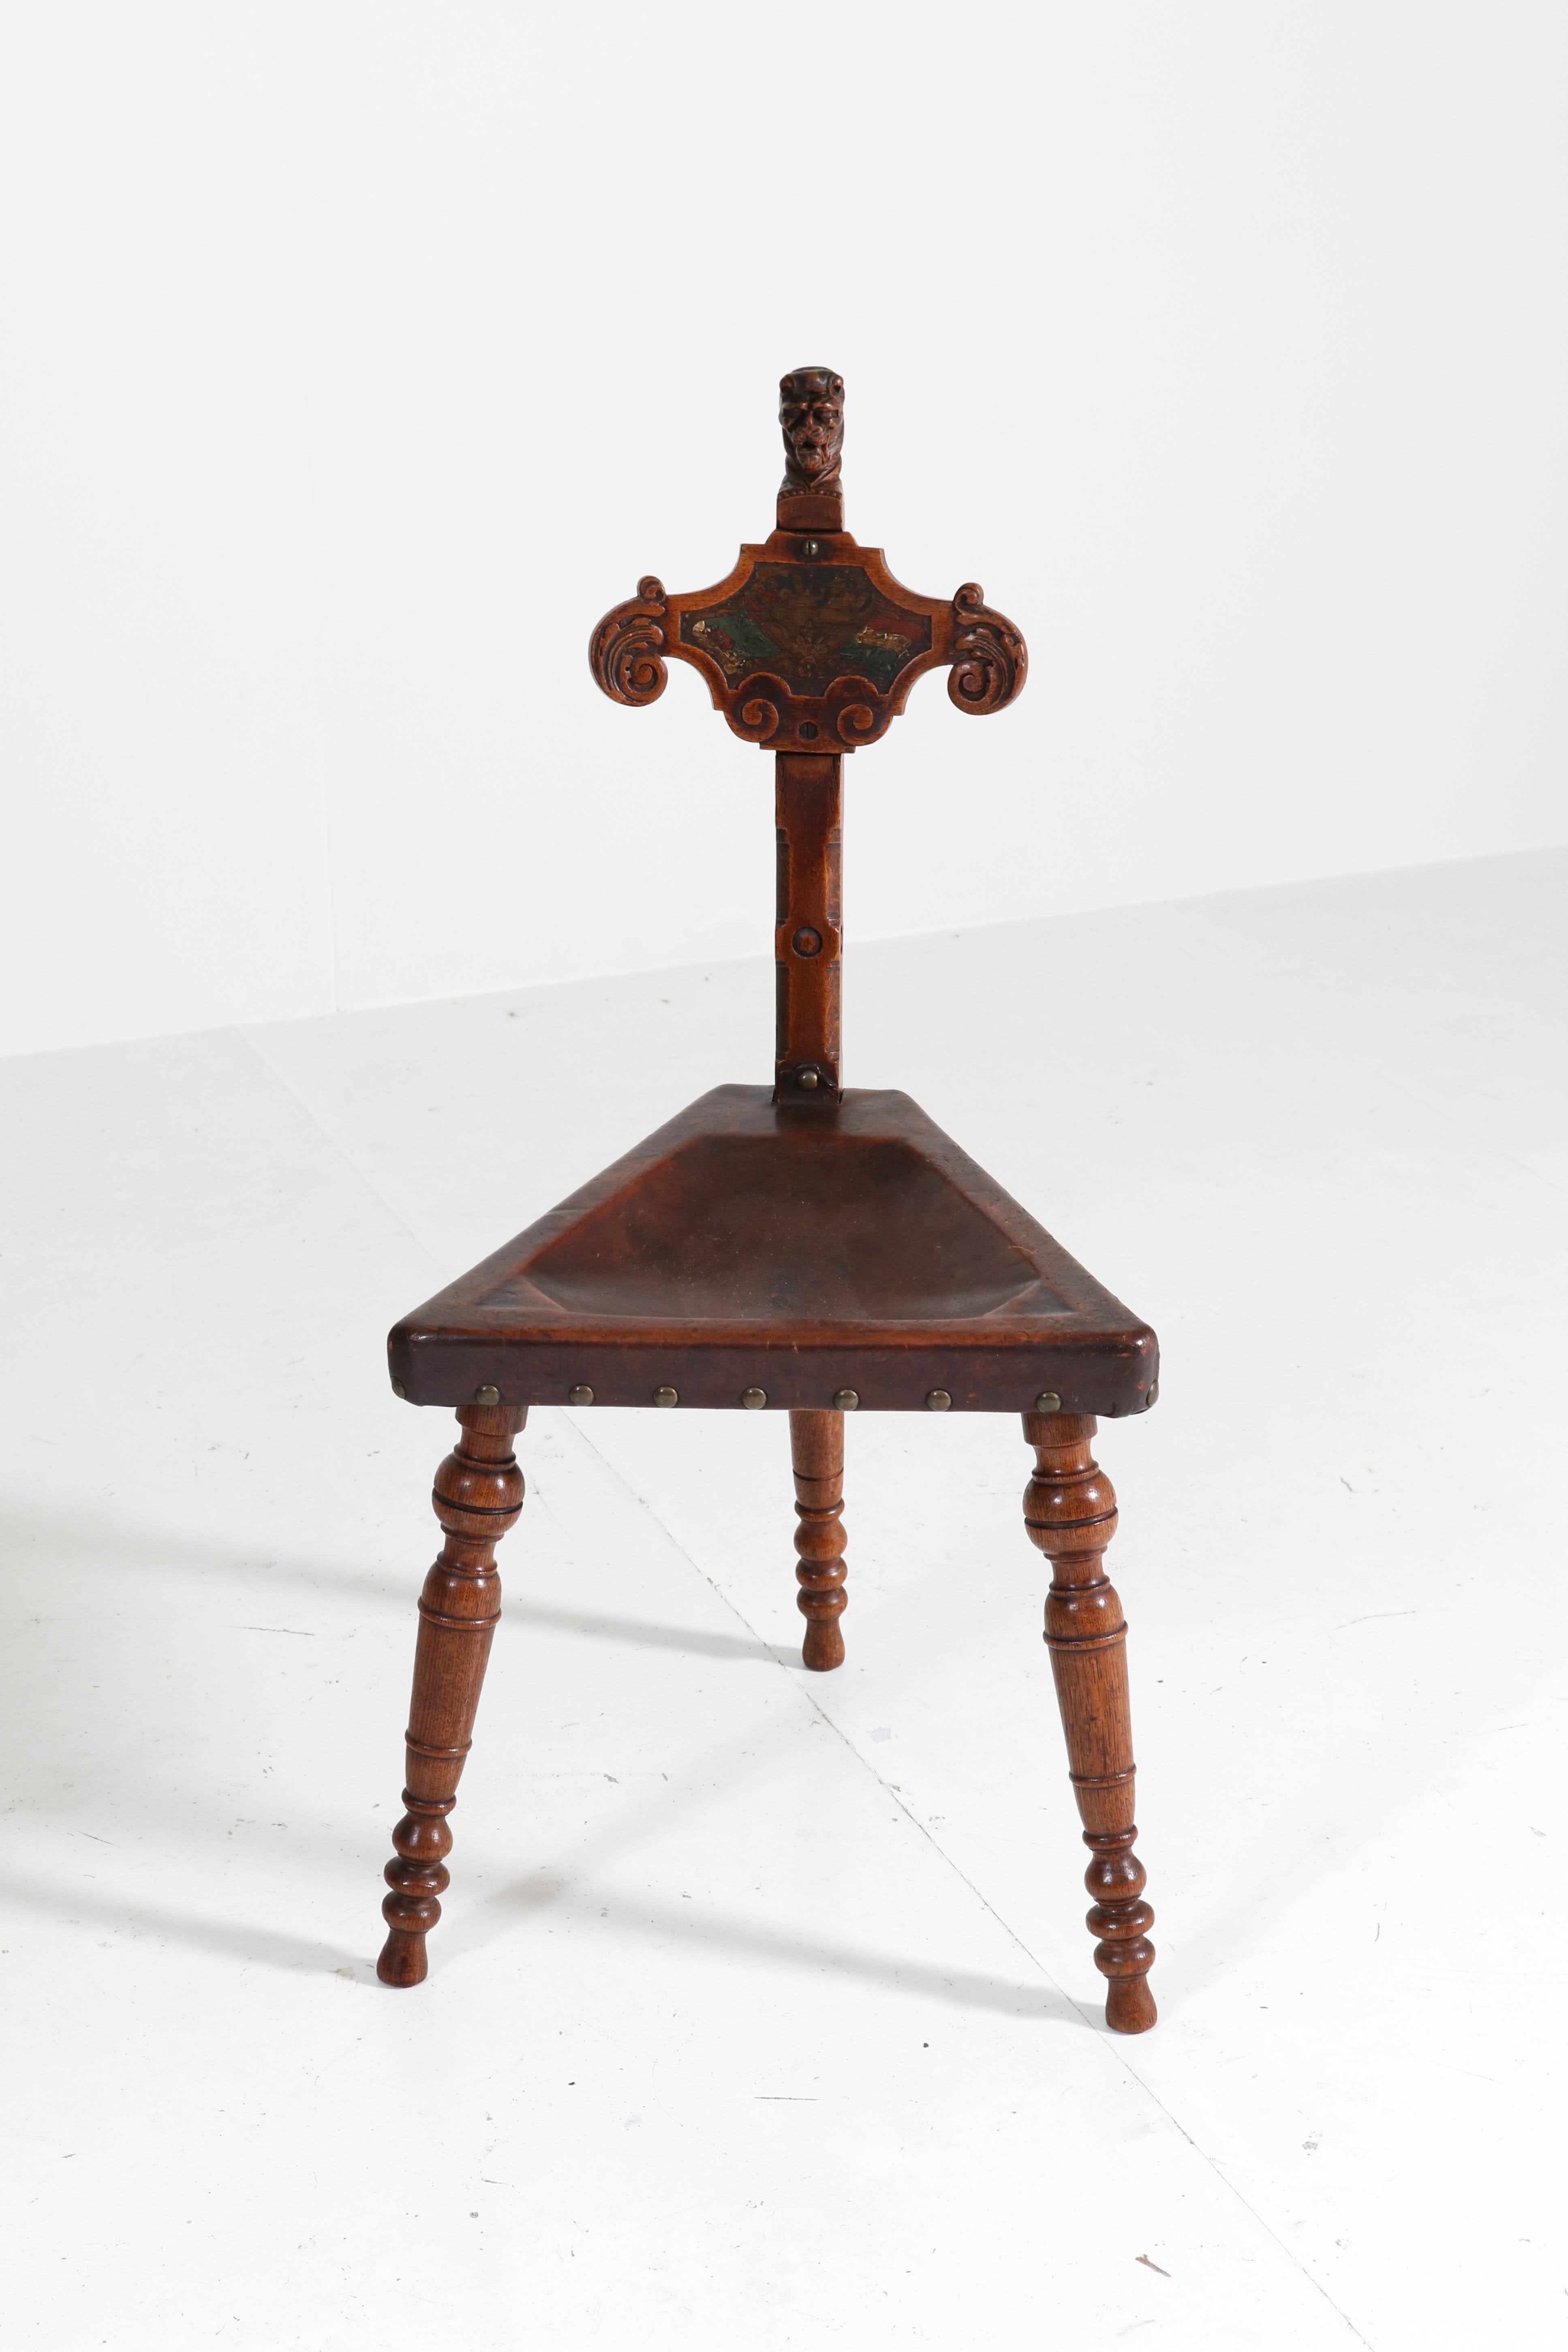 Wonderful and rare Renaissance Revival tripod chair from circa 1900.
Solid oak with original leather seat.
Carved head of a lion and hand painted flags of the Netherlands and Portugal.
In very good condition with minor wear consistent with age